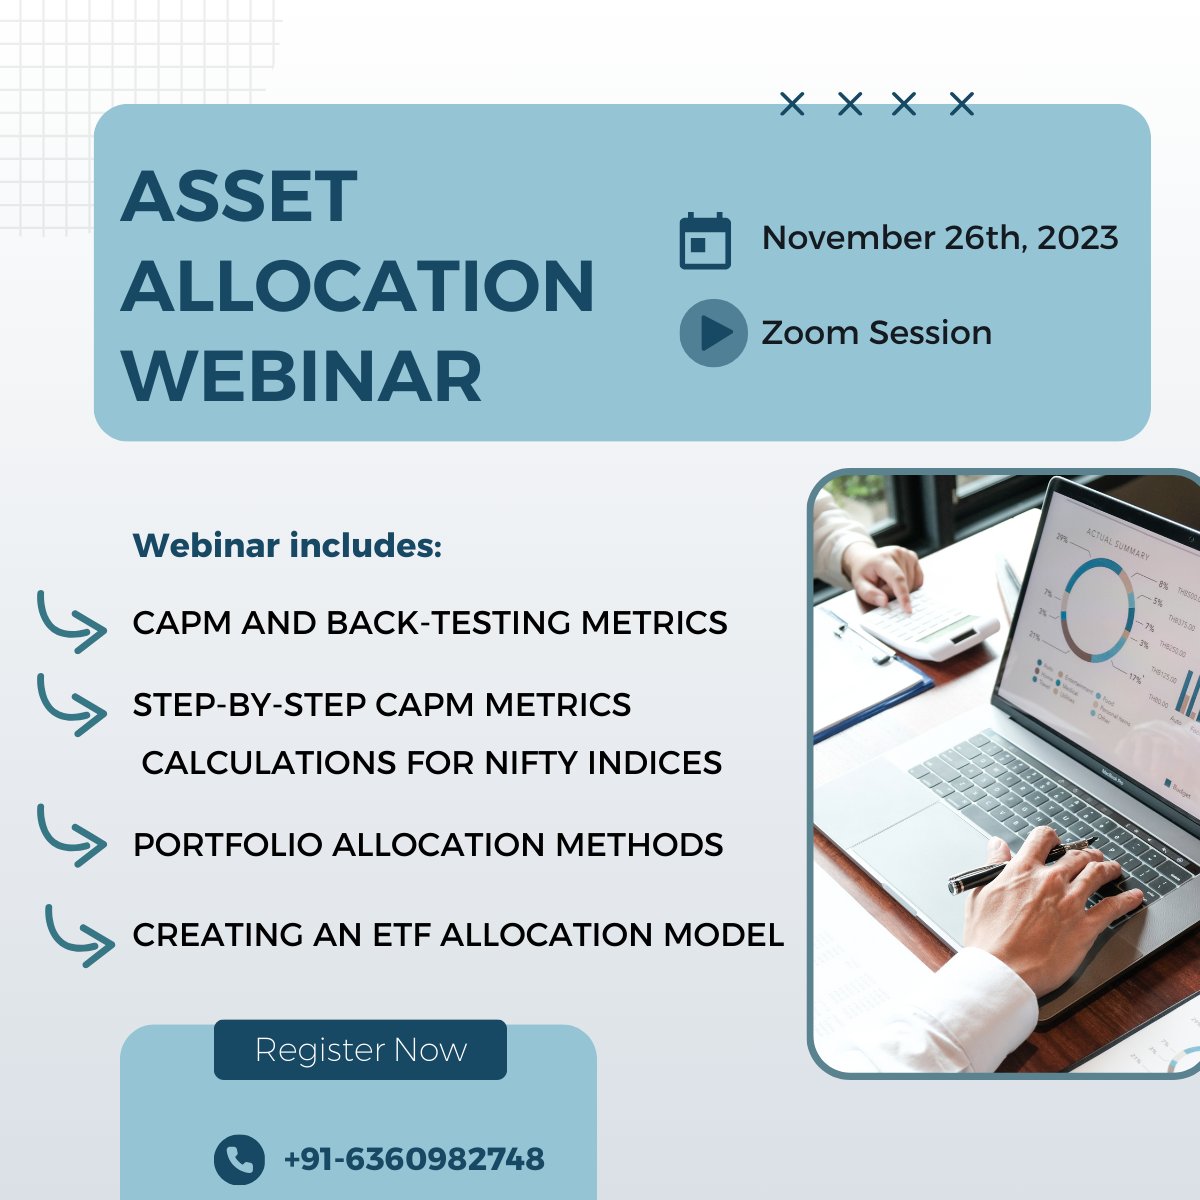 📢 Sign-up for the upcoming asset allocation webinar scheduled for November 26, 2023   

For more details and registration follow the link>>bit.ly/3MRpoGH 

#webinar #assetallocation